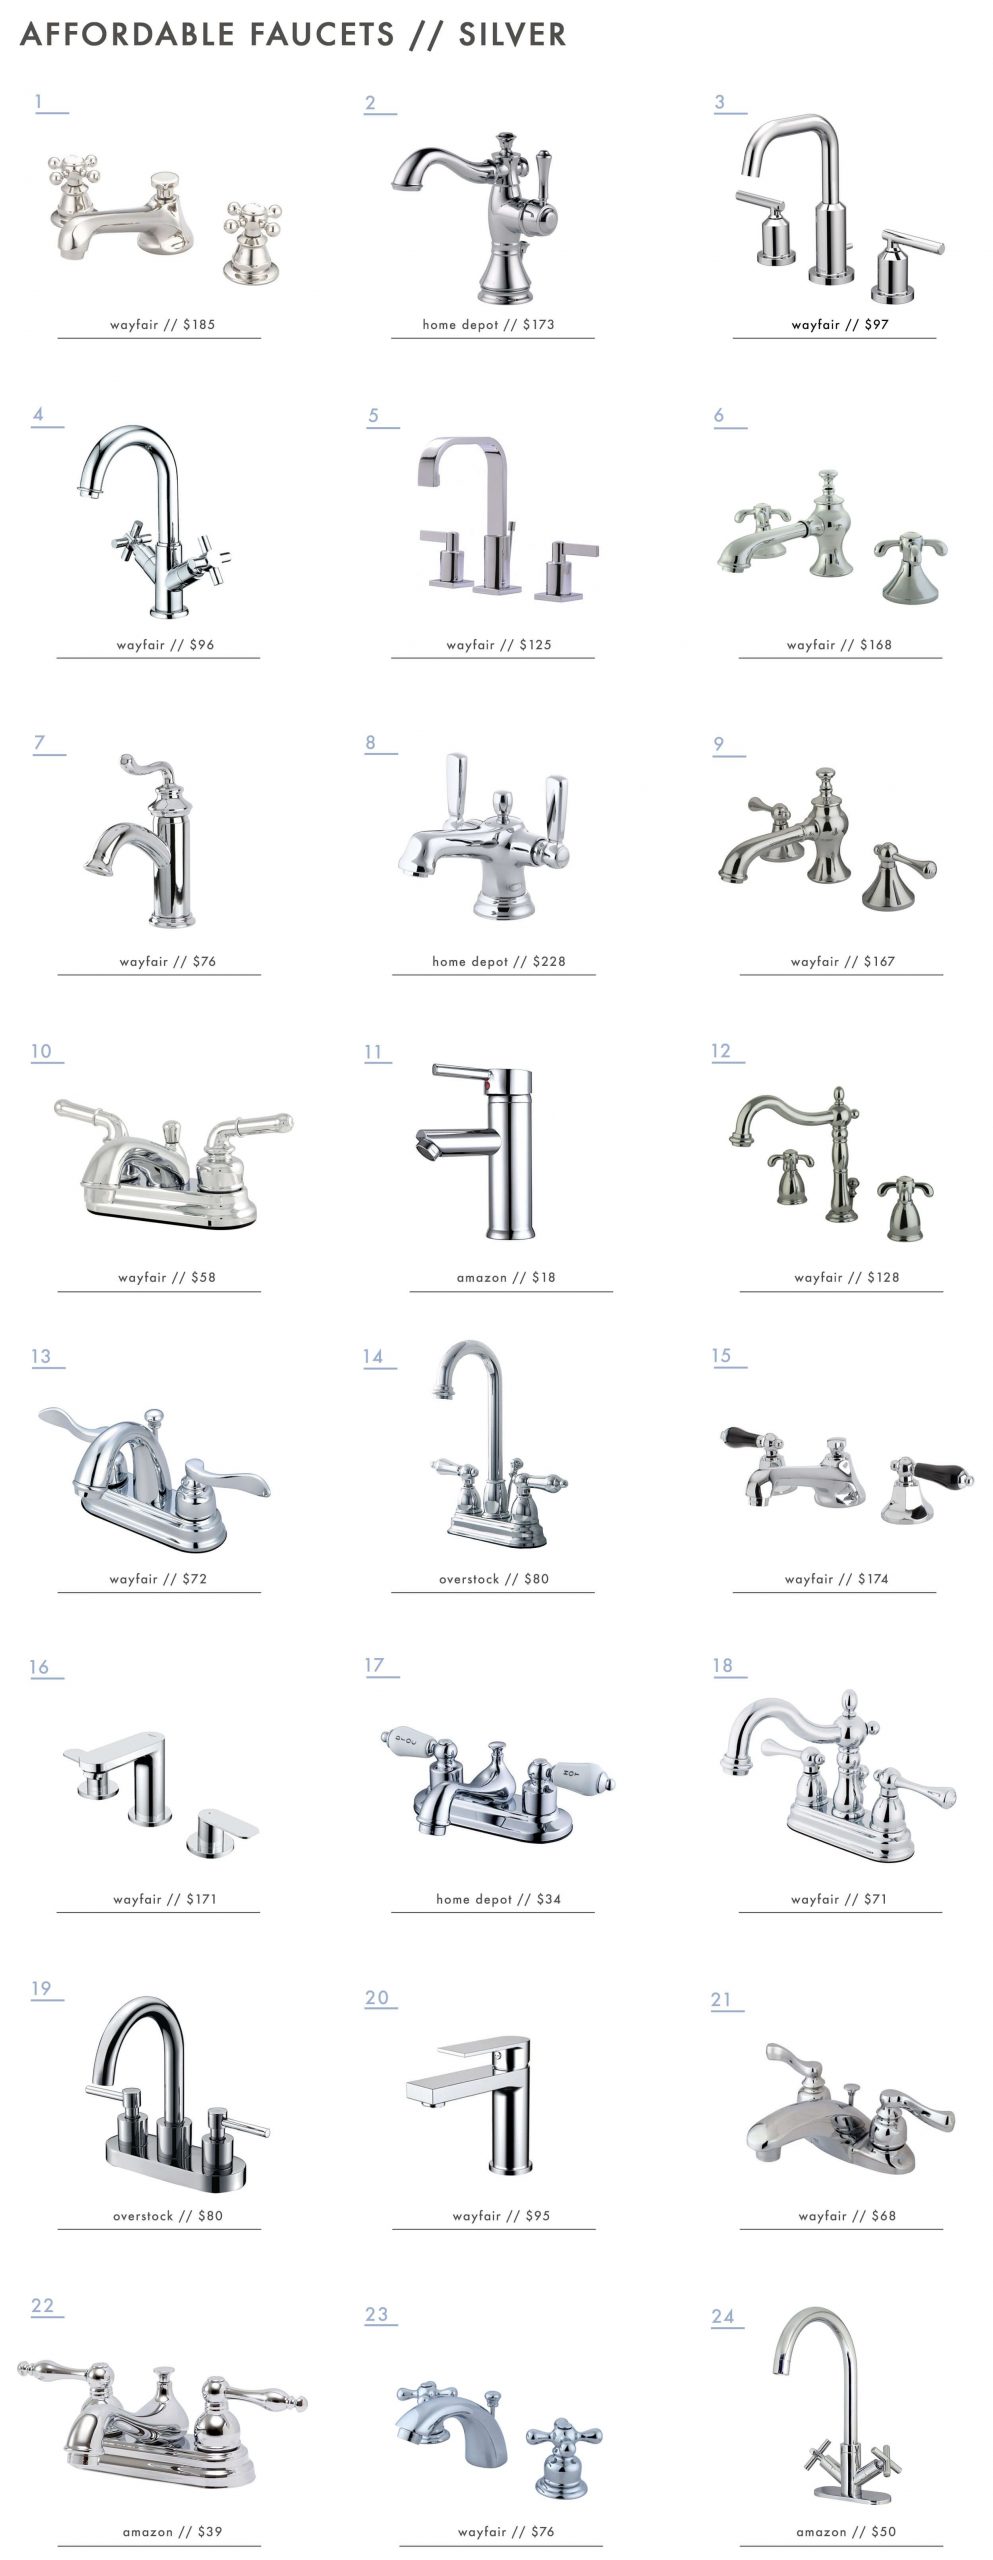 57 Affordable Bathroom Faucets - Emily Henderson